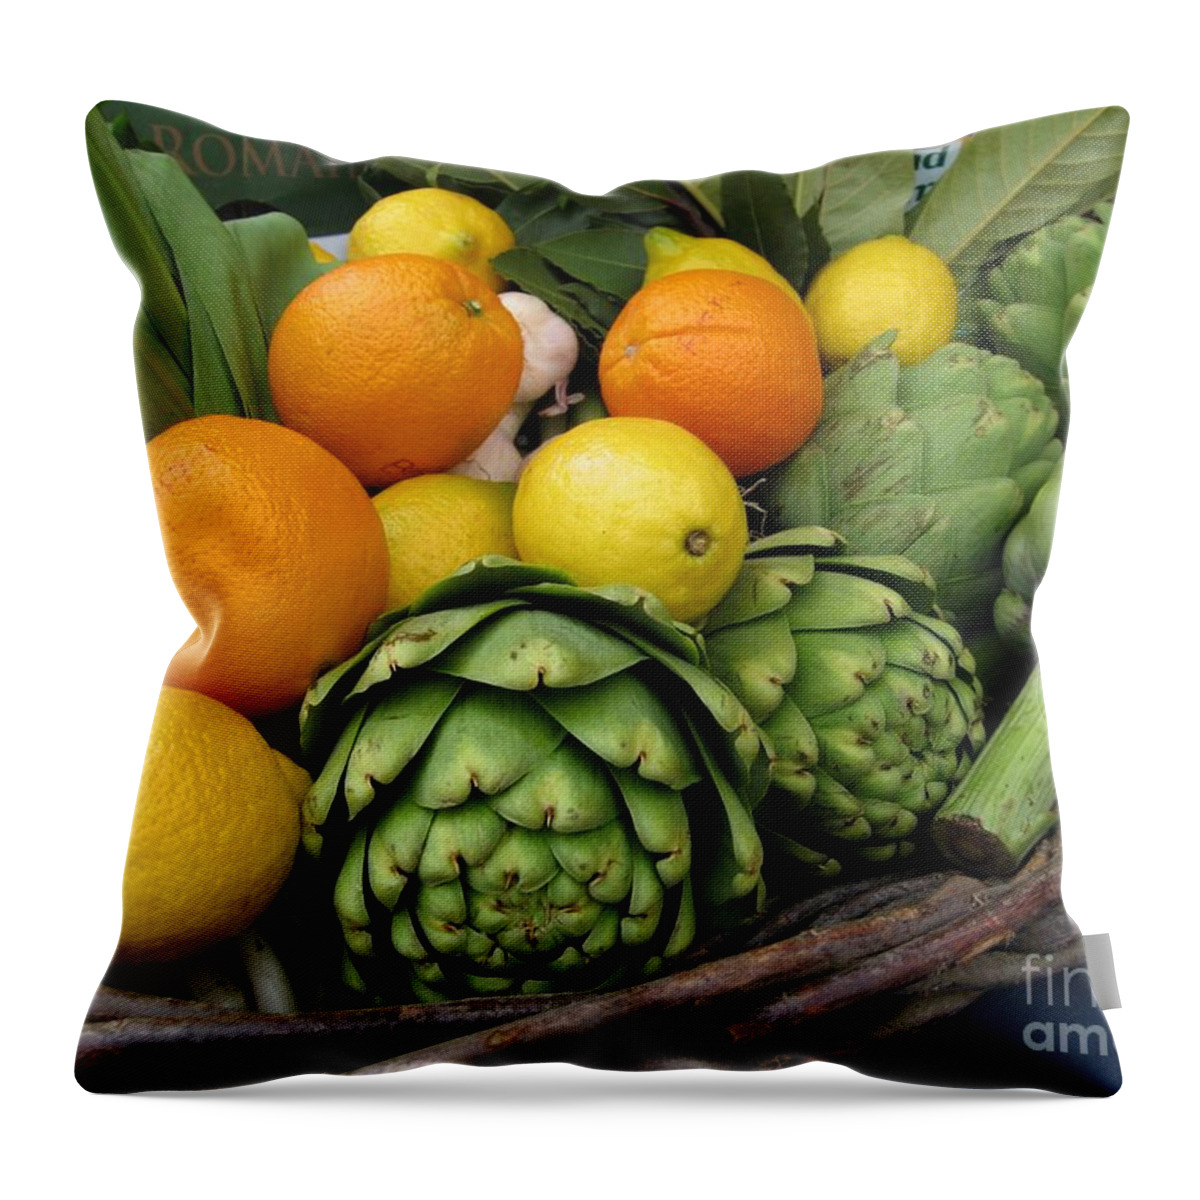 Fruit Throw Pillow featuring the photograph Artichokes Lemons and Oranges by James B Toy